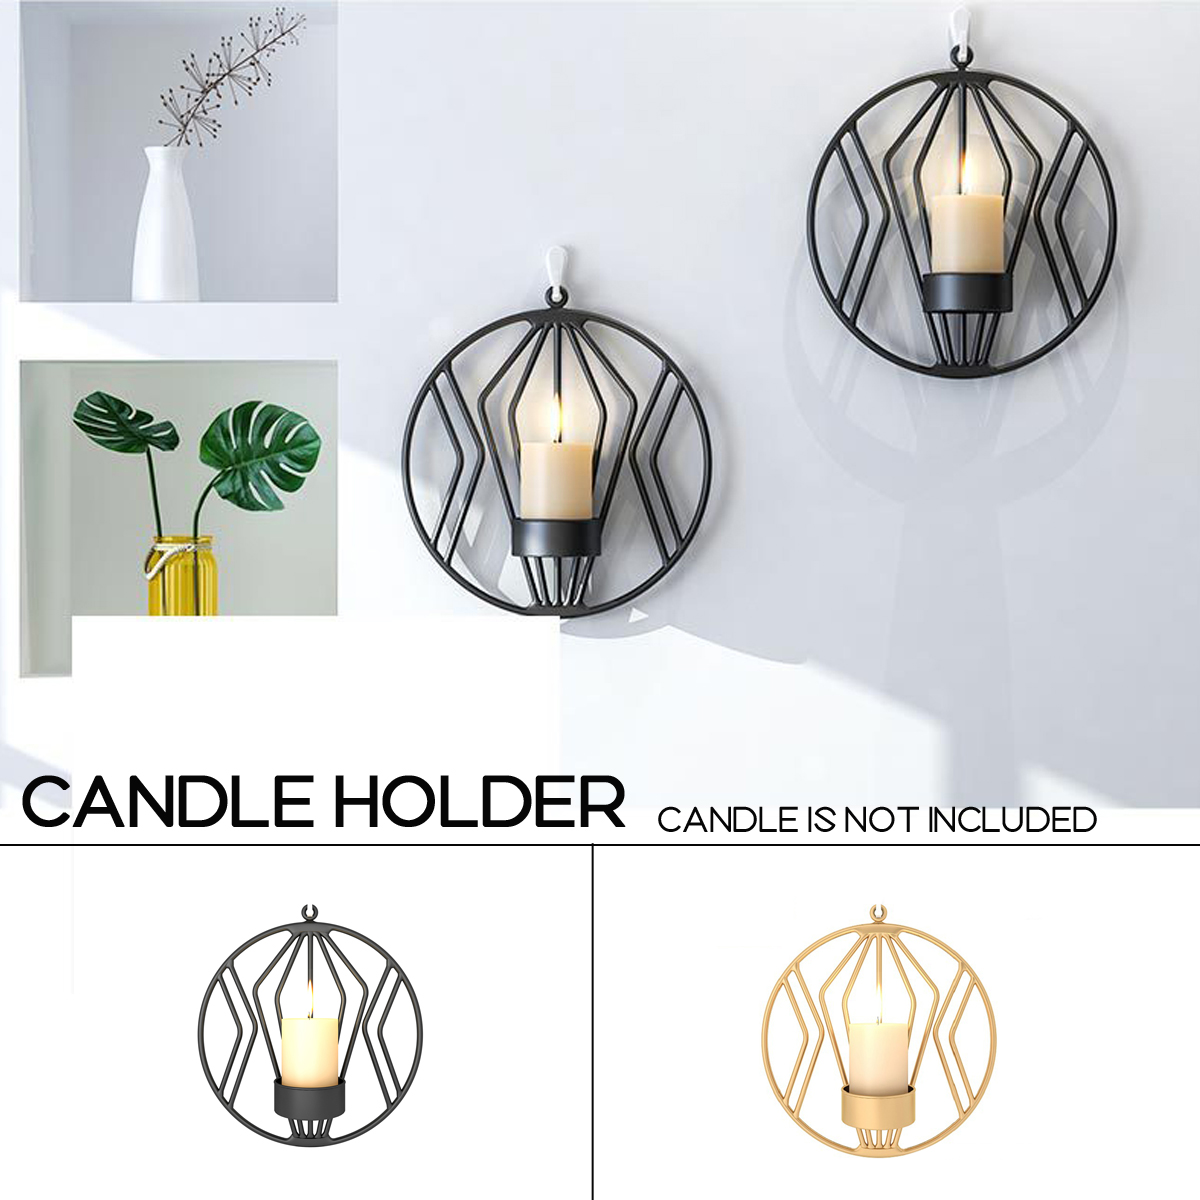 3D-Geometric-Candlestick-Iron-Wall-Candle-Holder-Sconce-Warm-Home-Party-Decor-1727945-3